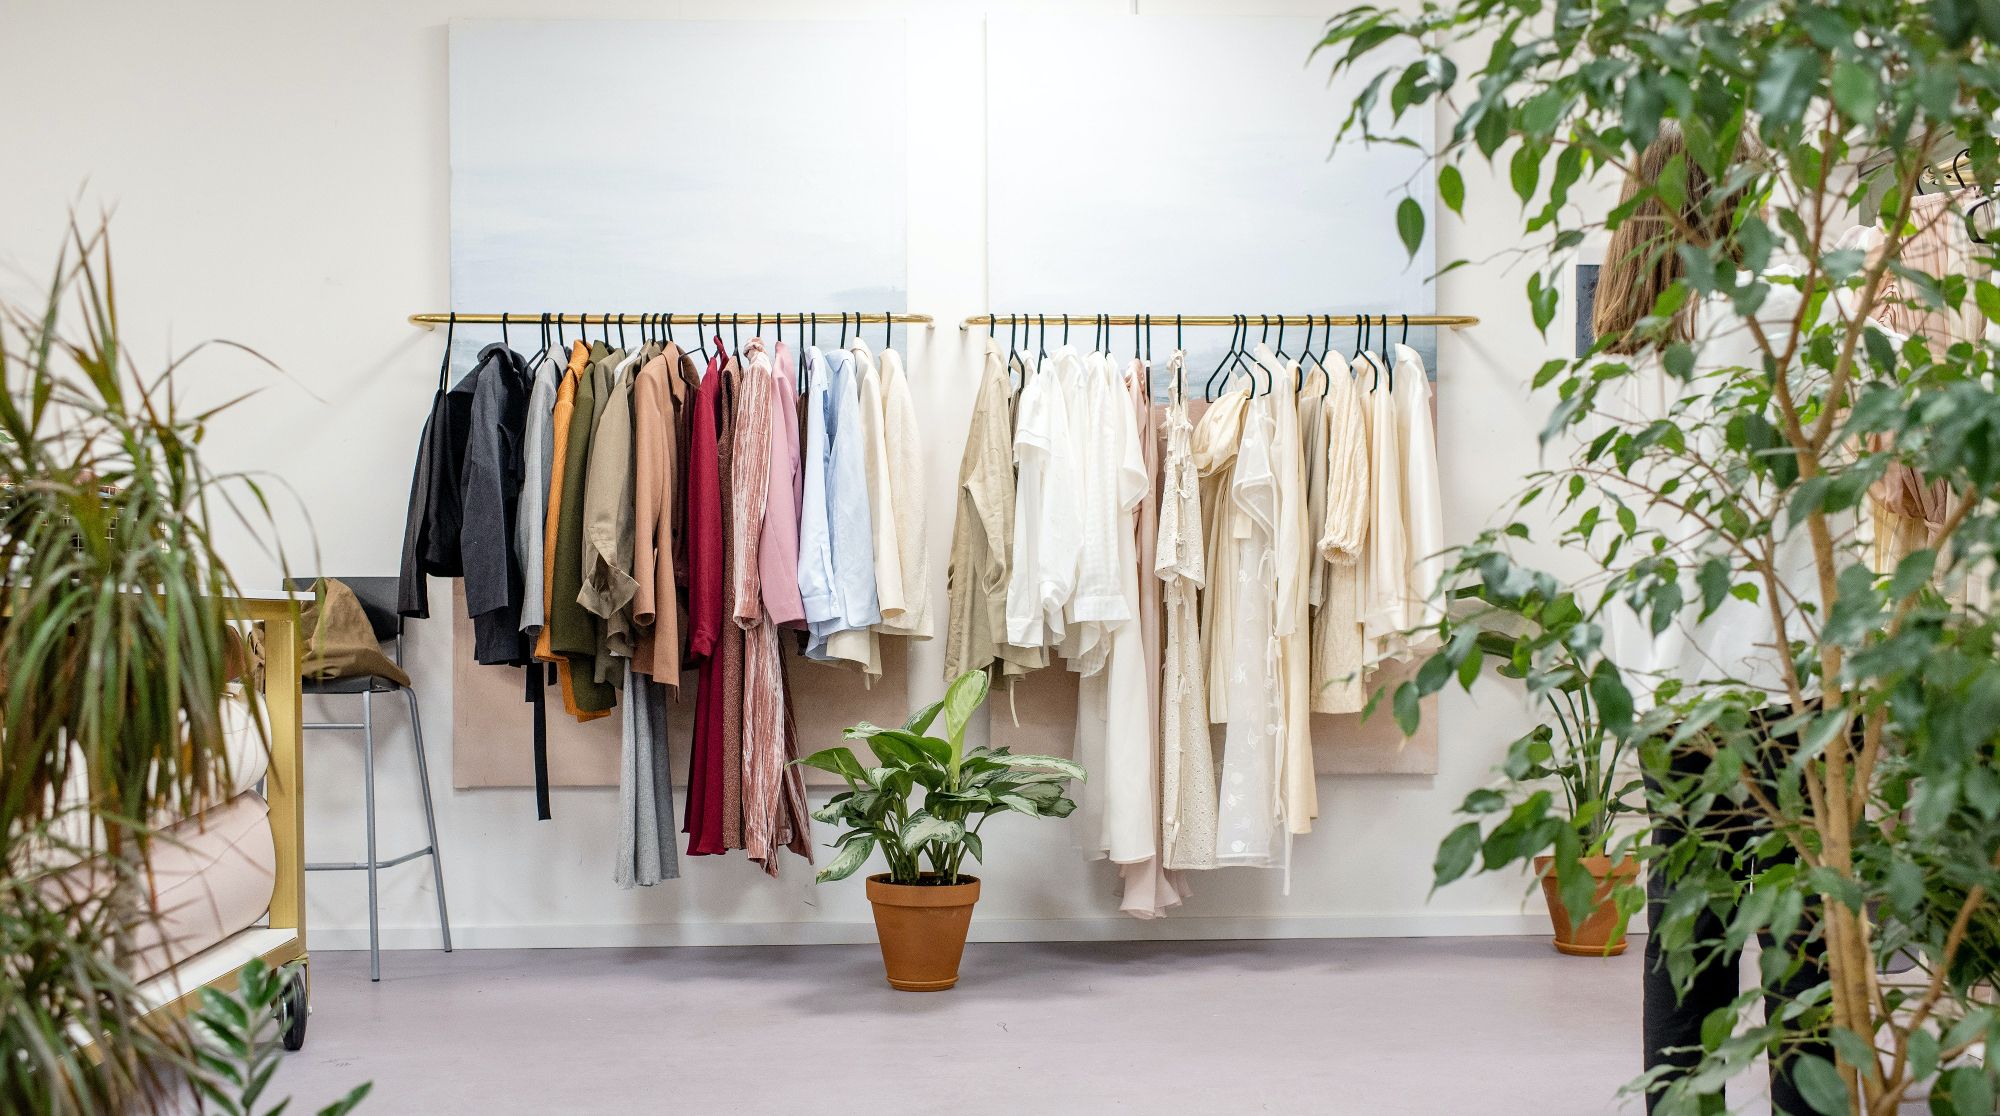 An image of a clothes rack in a store surrounded by plants